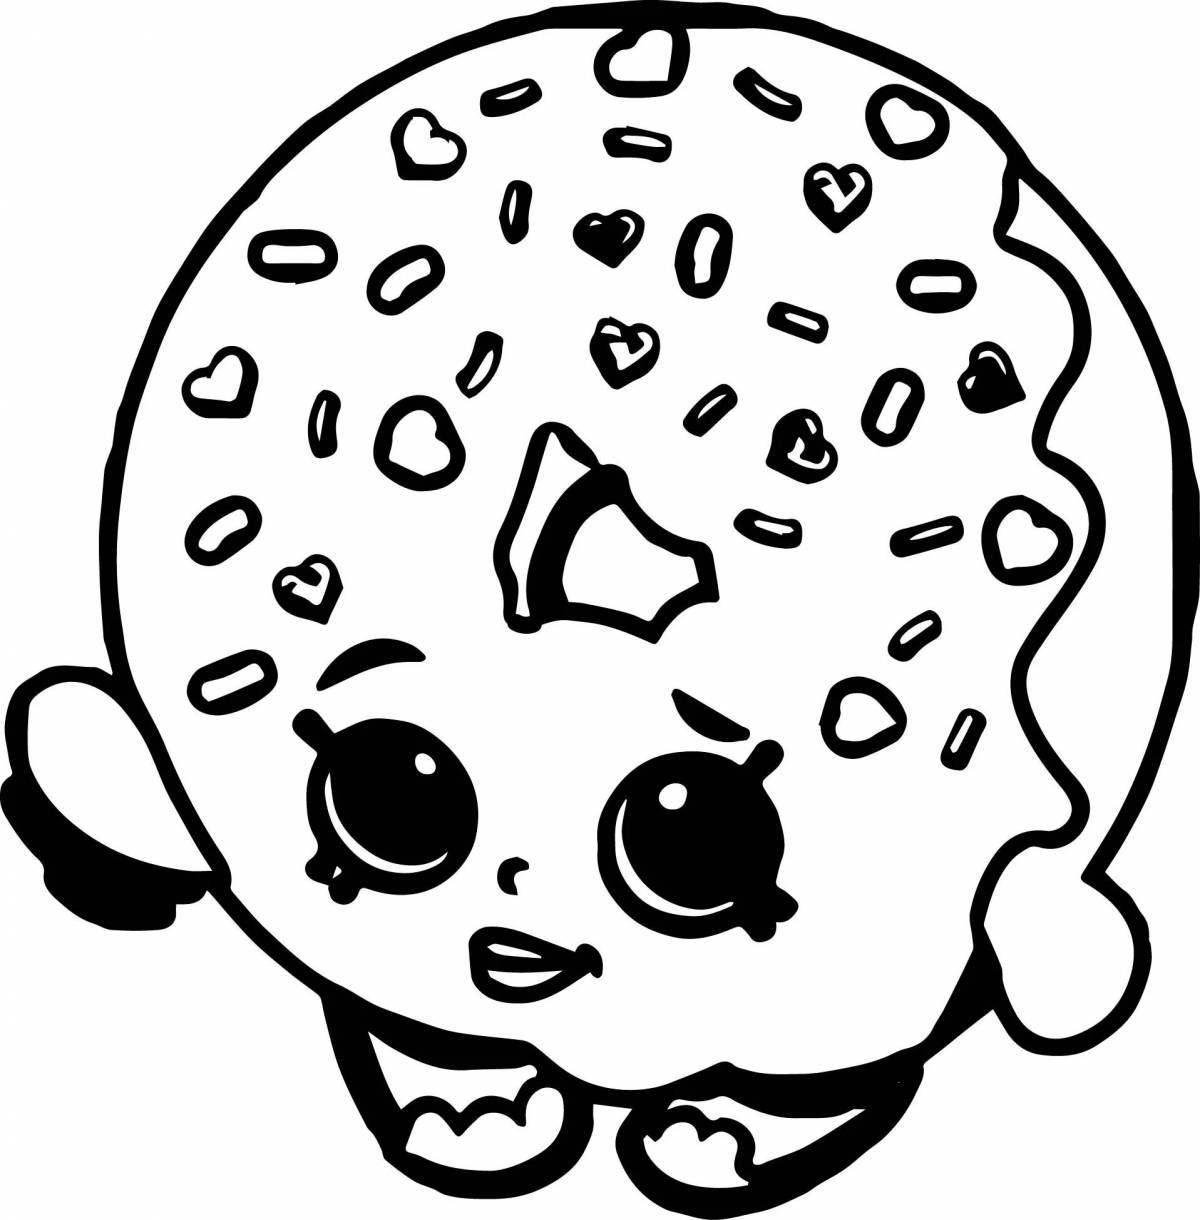 Doughnut coloring page for girls